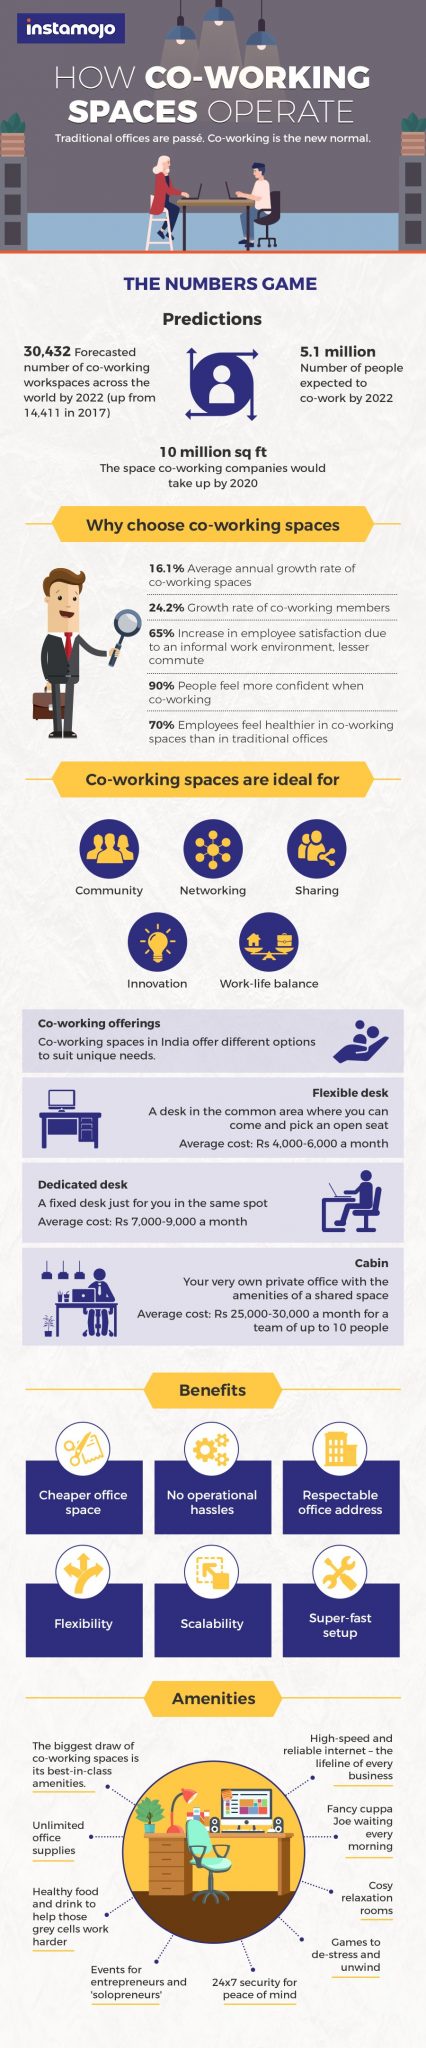 How Co-working Spaces Operate in India